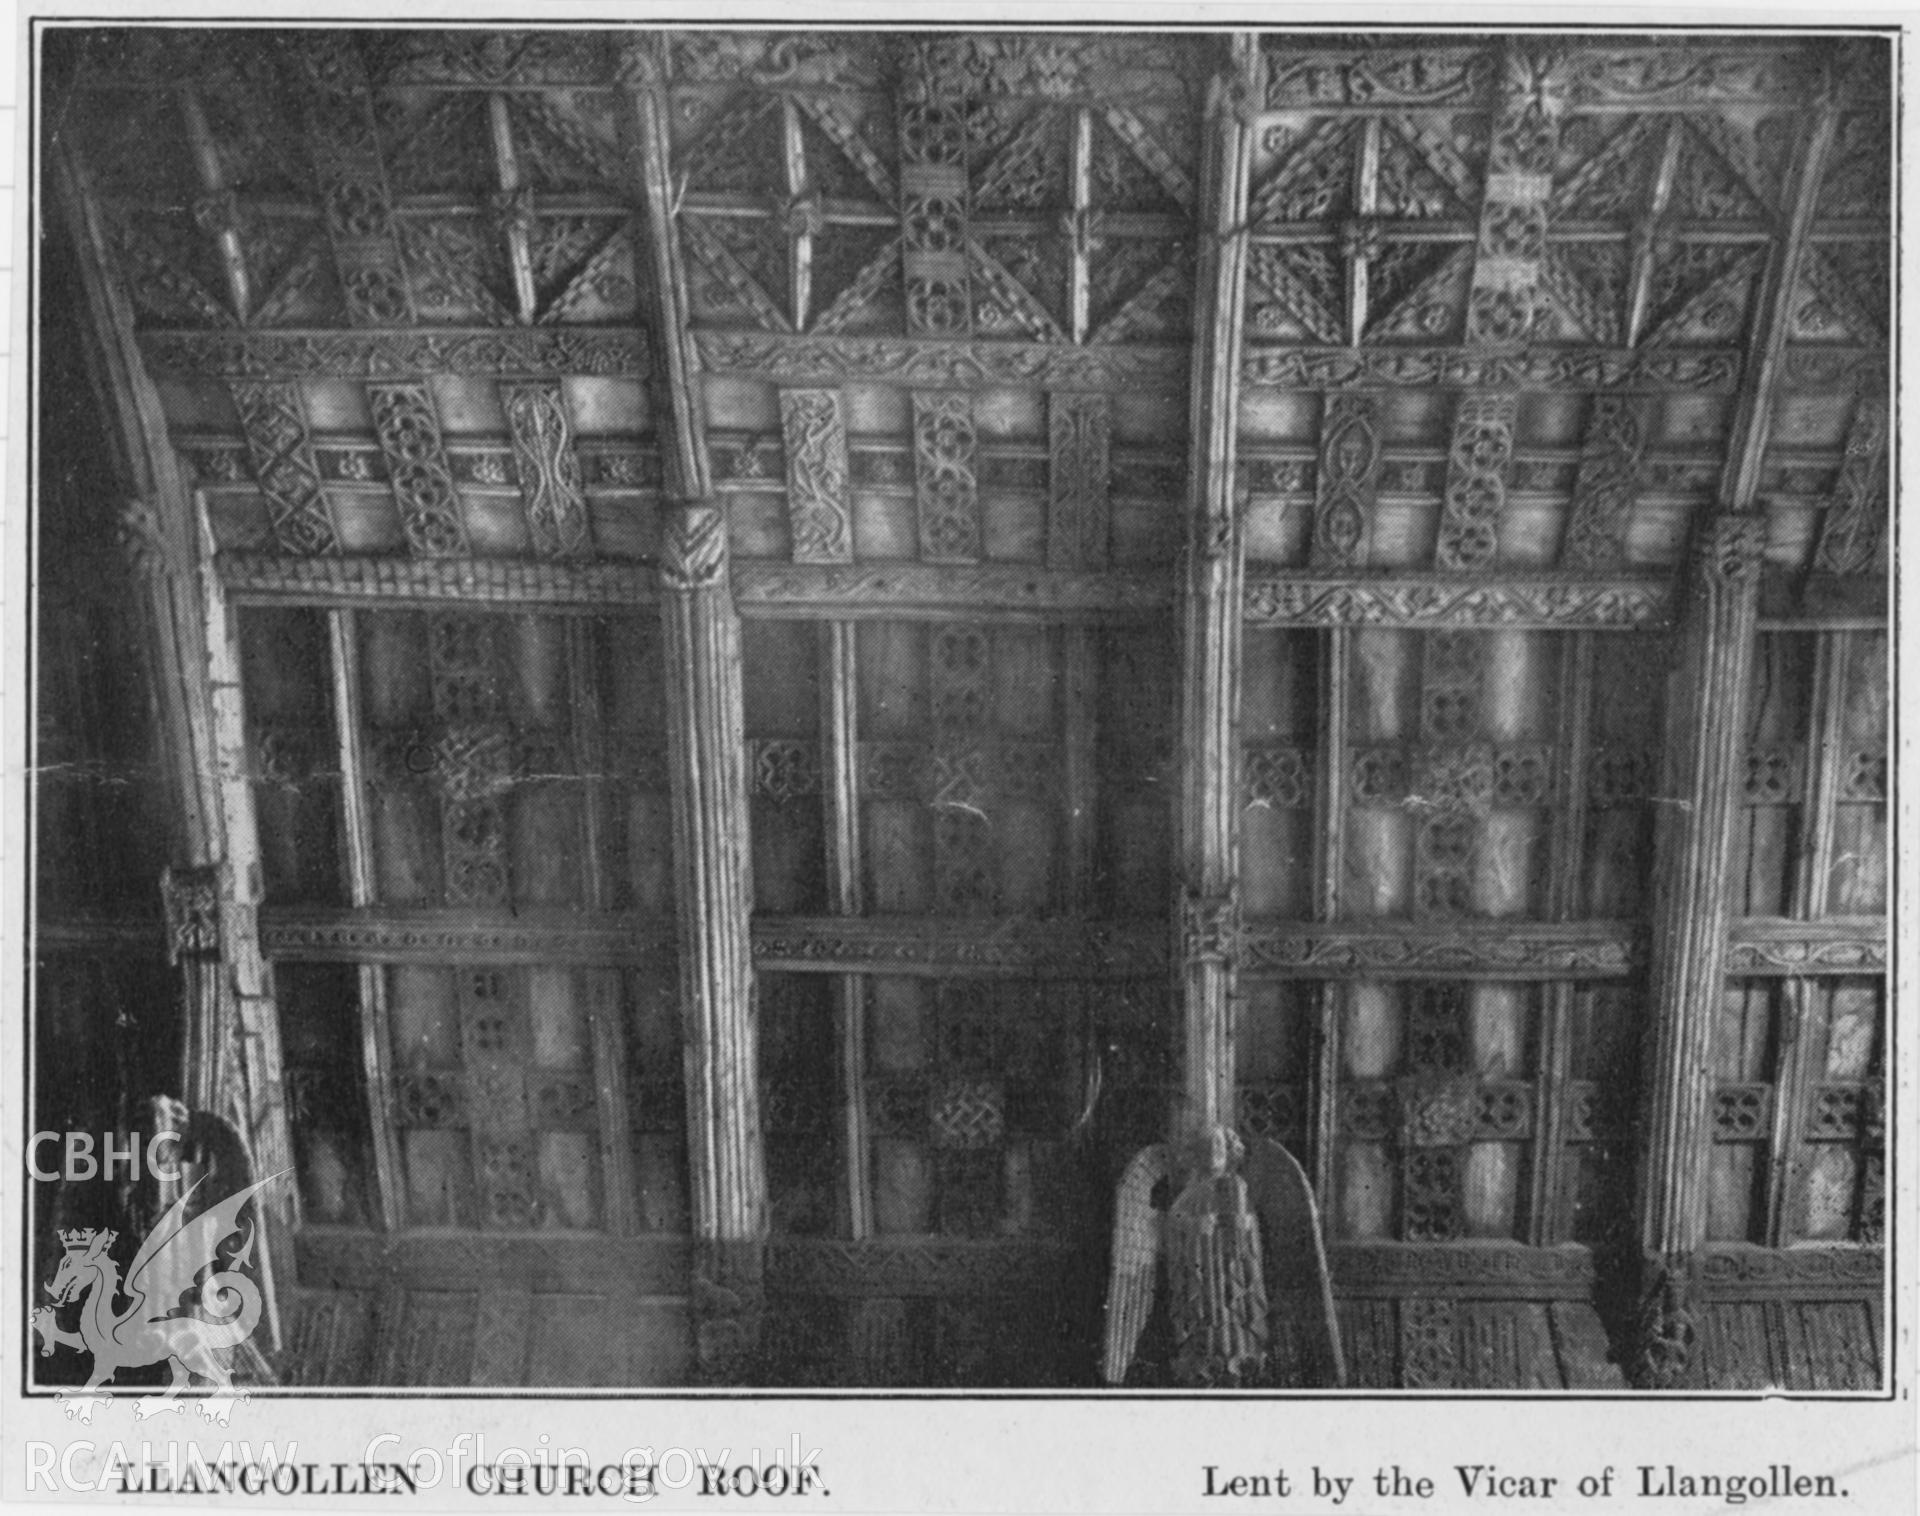 Digitised copy of a black and white print from an unknown source showing the roof at St Collen's Church, Llangollen.